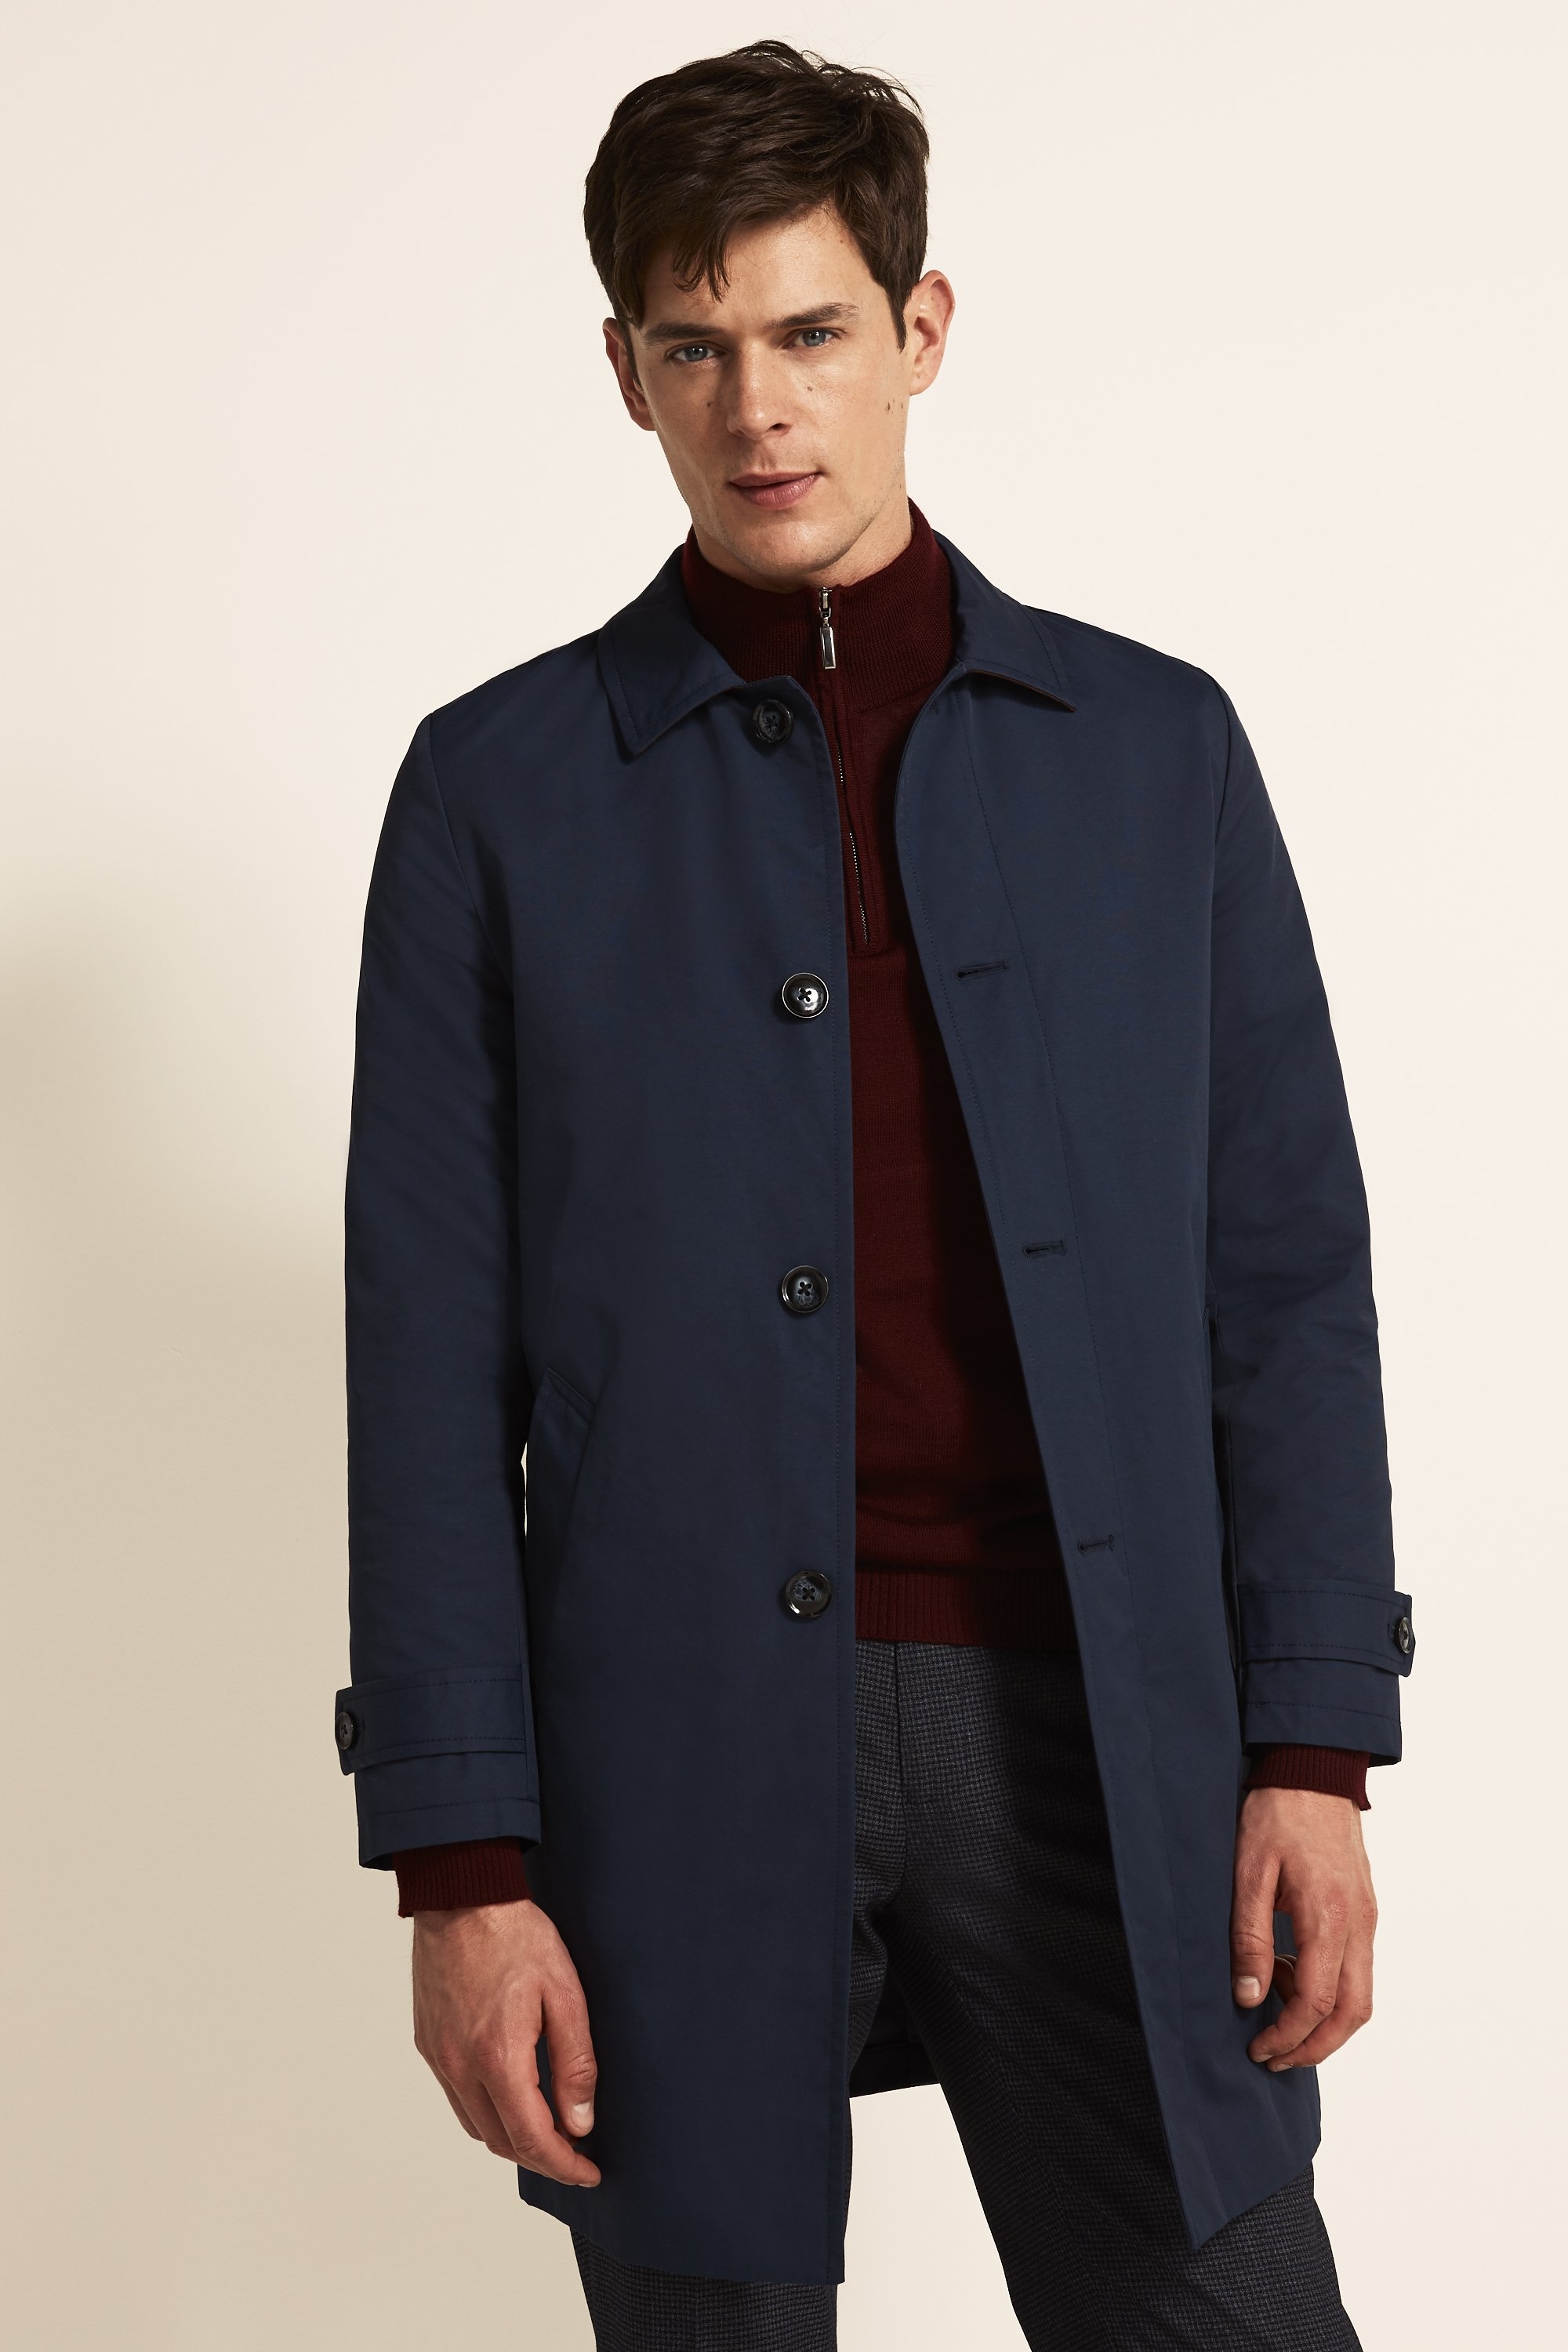 Tailored Fit Navy Raincoat | Buy Online at Moss